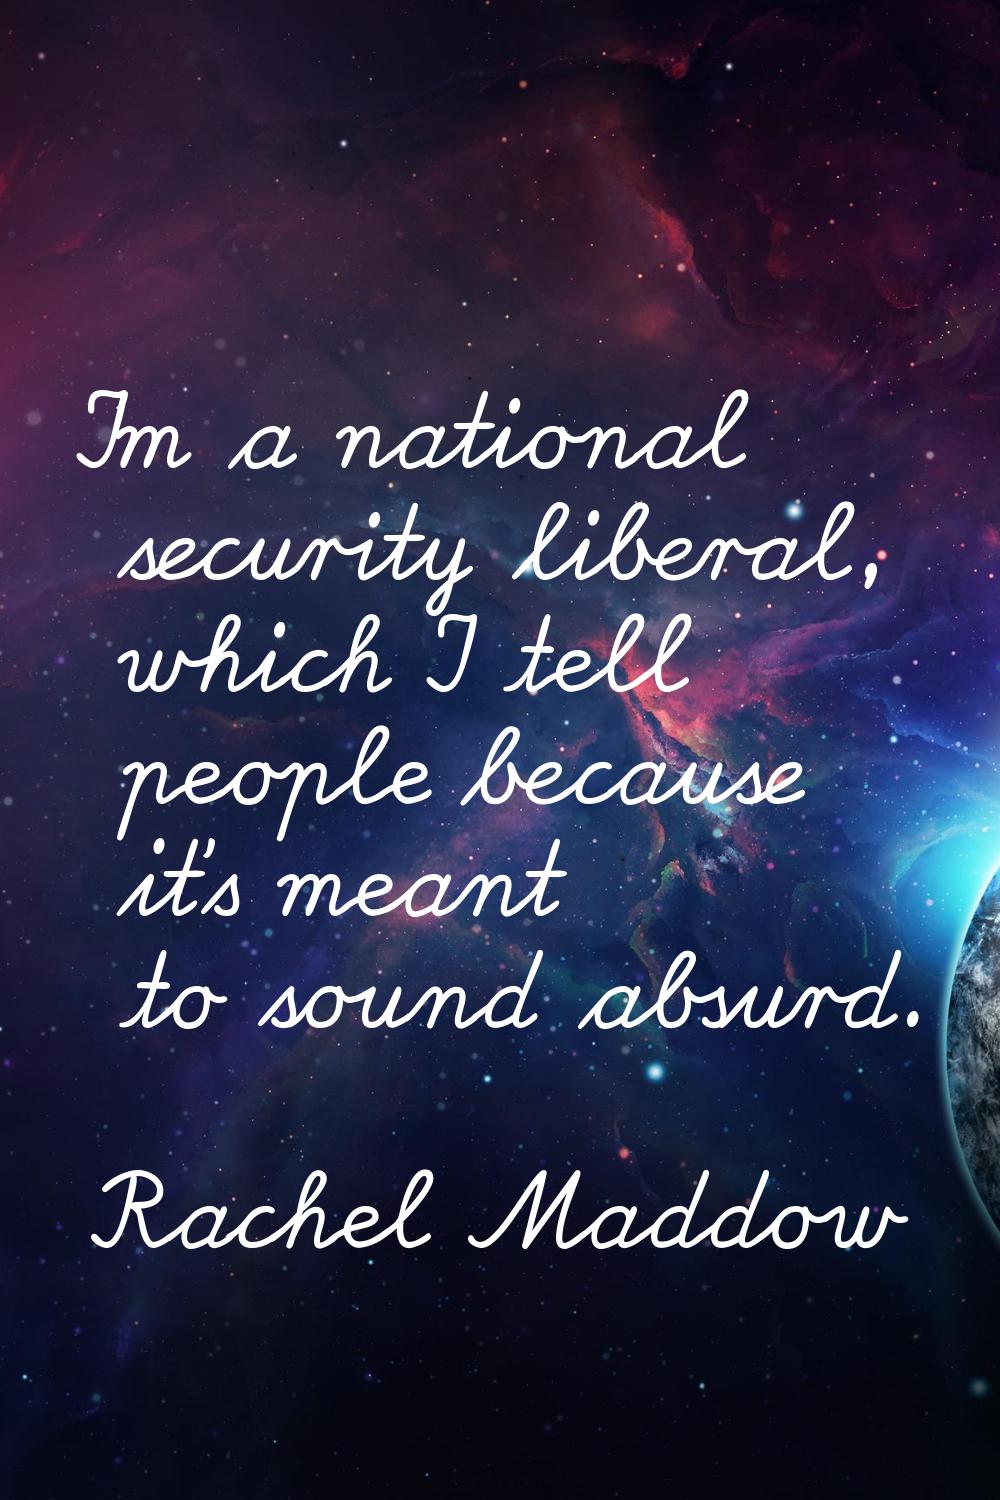 I'm a national security liberal, which I tell people because it's meant to sound absurd.